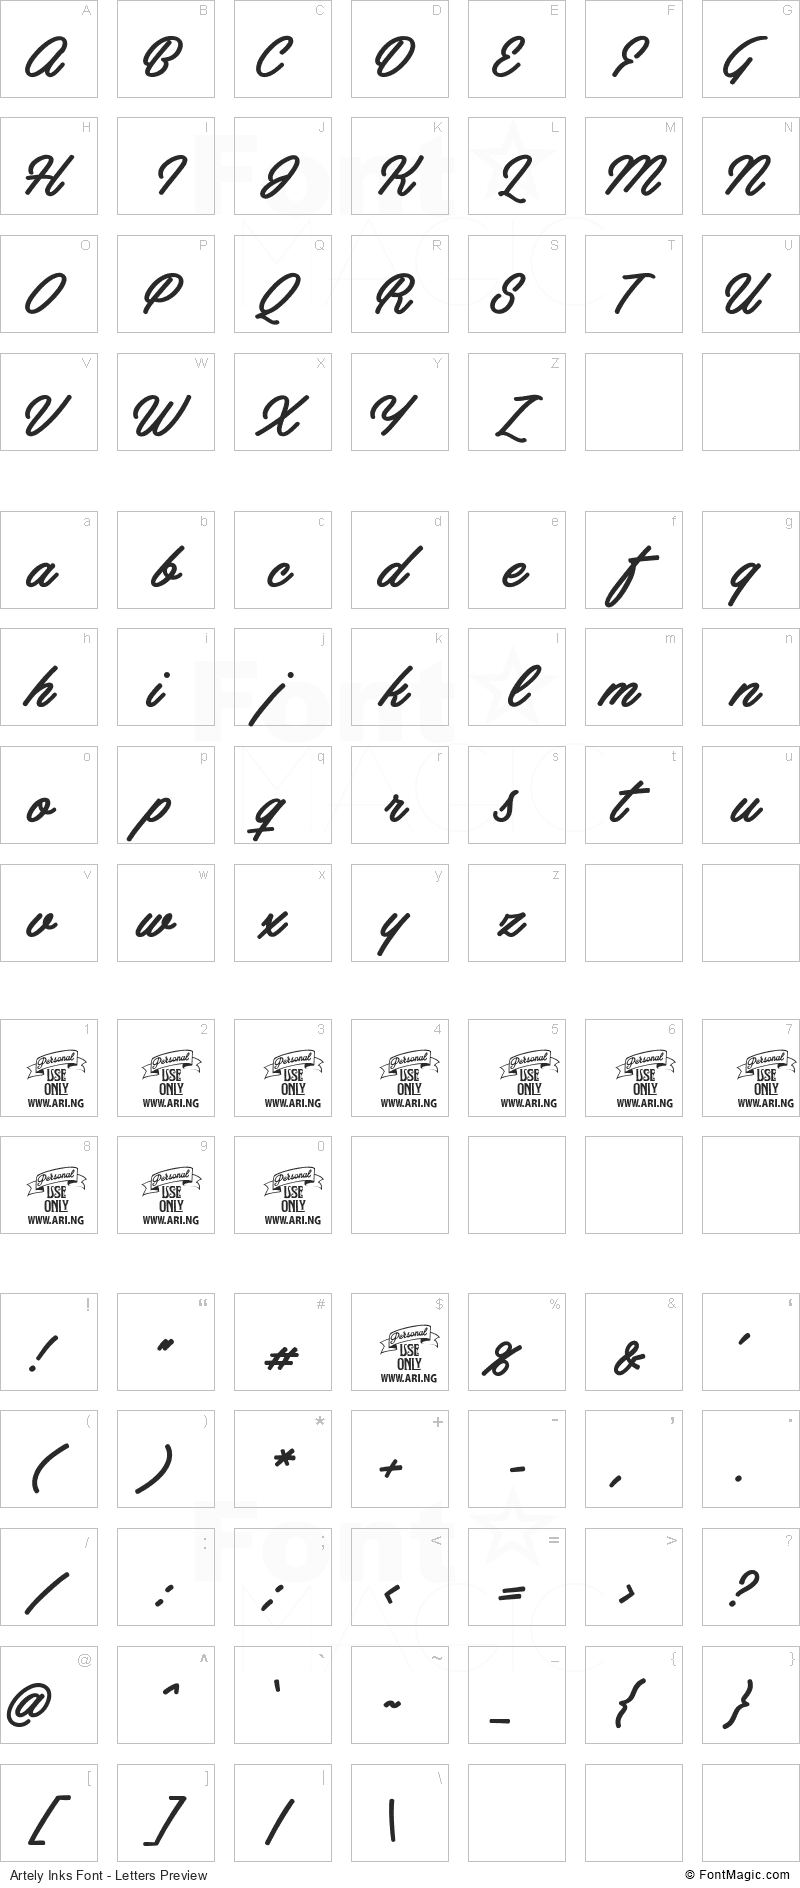 Artely Inks Font - All Latters Preview Chart